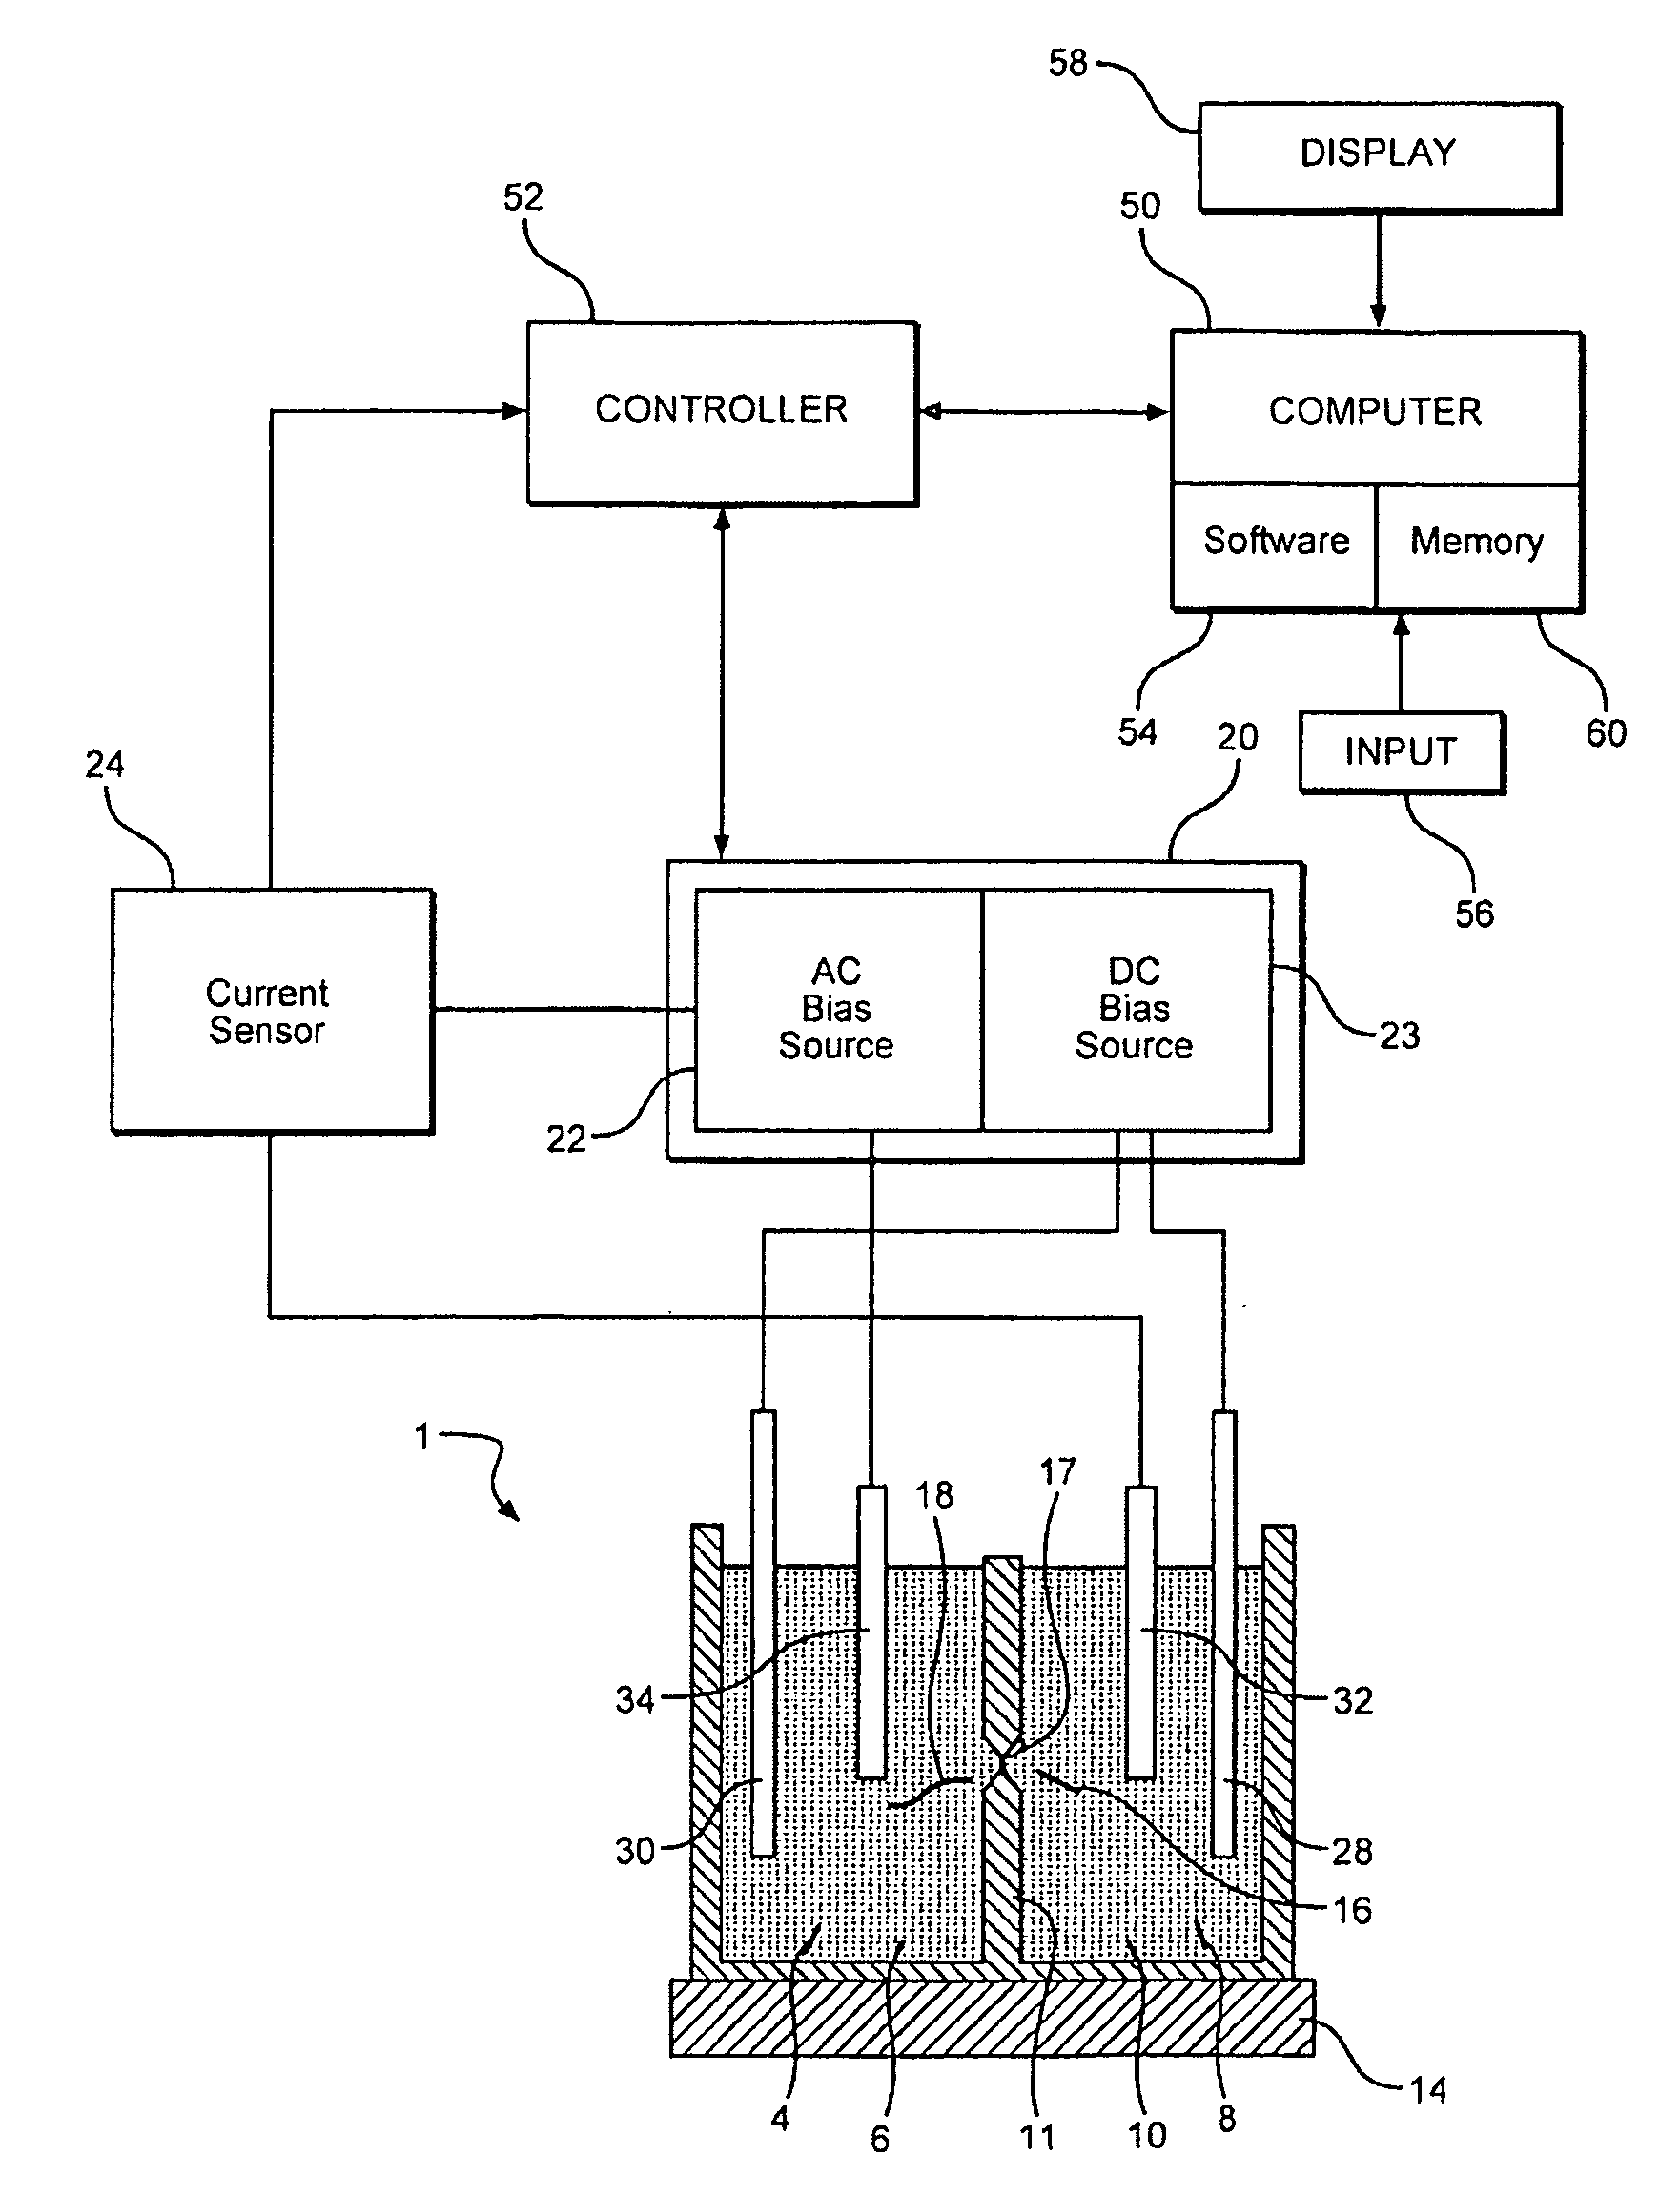 System and Method to Improve Accuracy of a Polymer